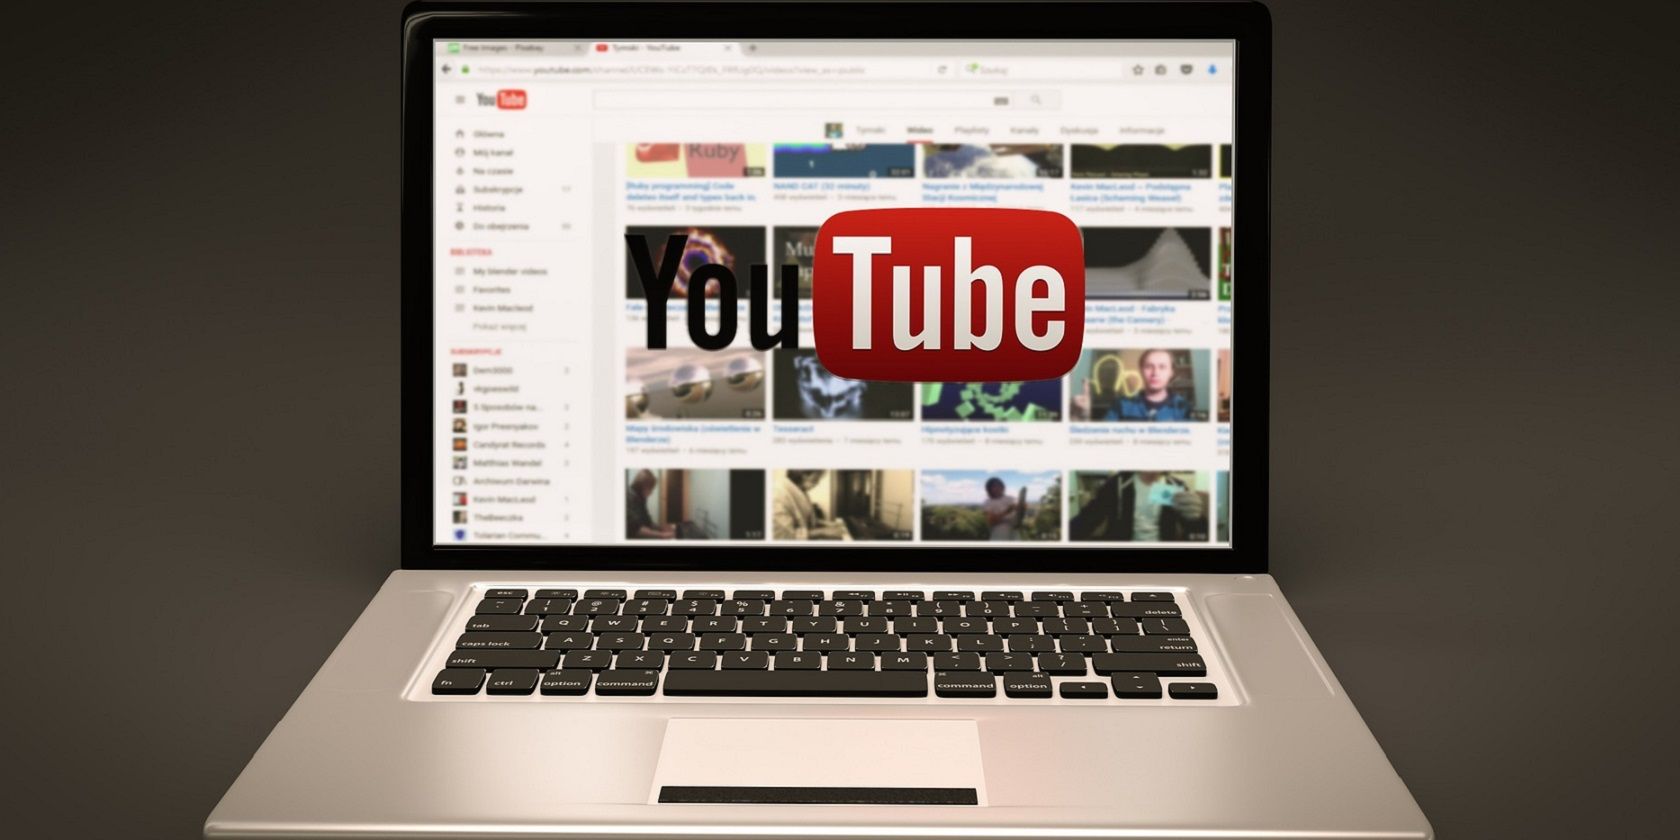 The YouTube website on a laptop 